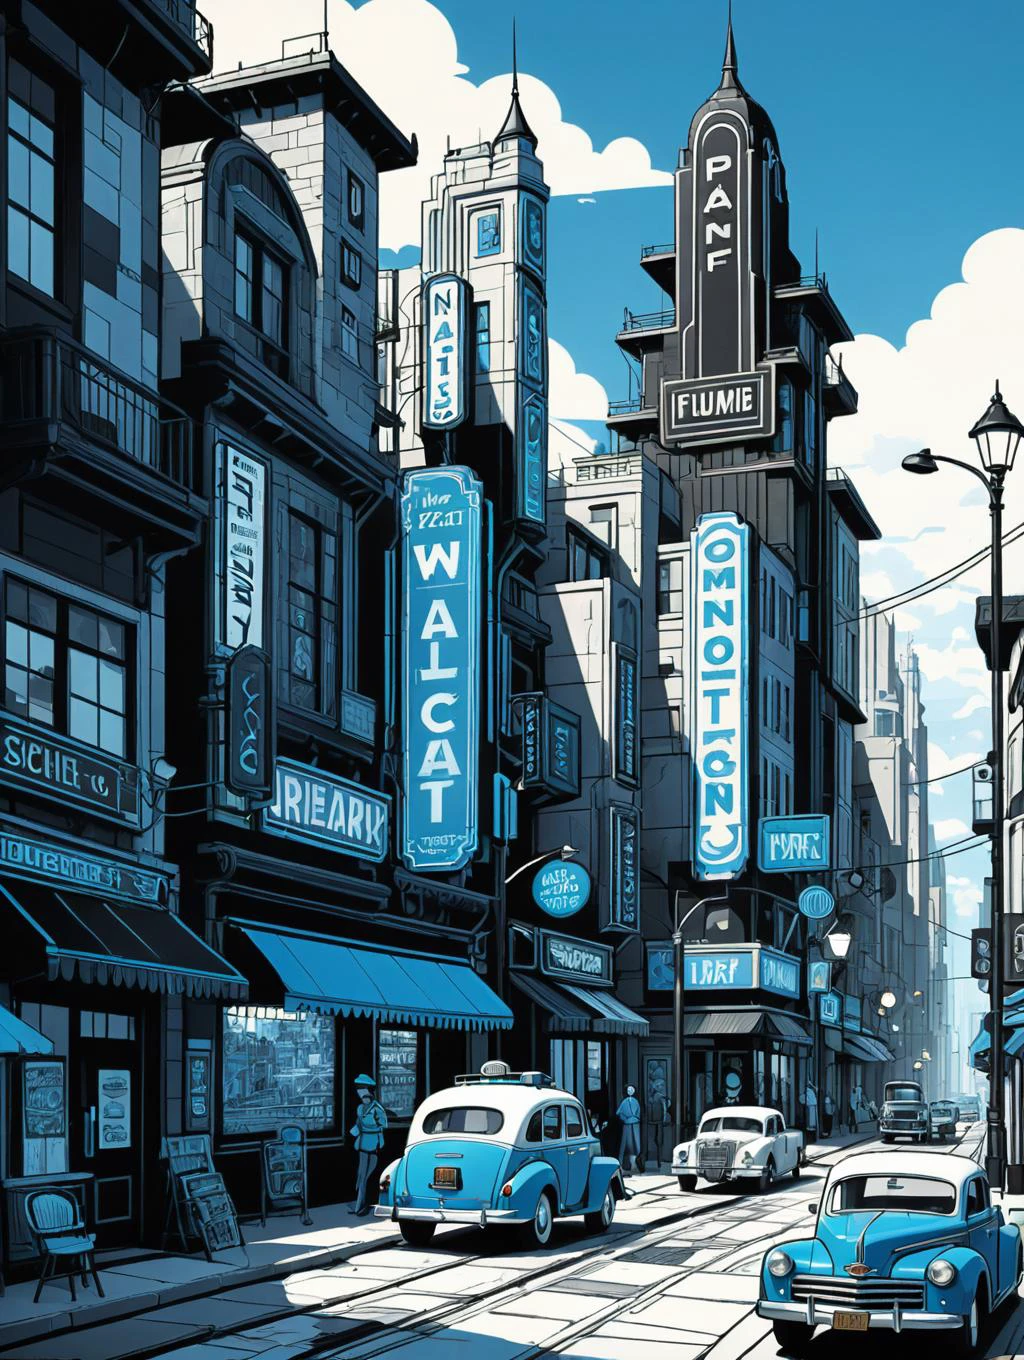 Extremely detailed, badass poster design, Art Noir/Art Deco. The artwork features an old, retro traditional patchwork of a busy town, Minimalist color scheme of blue and black
A sketch, Sketchfab, 2D, trending in Artstation, black and white, pencil and marker, style by Pixar, Dreamworks, Illumination cartoon